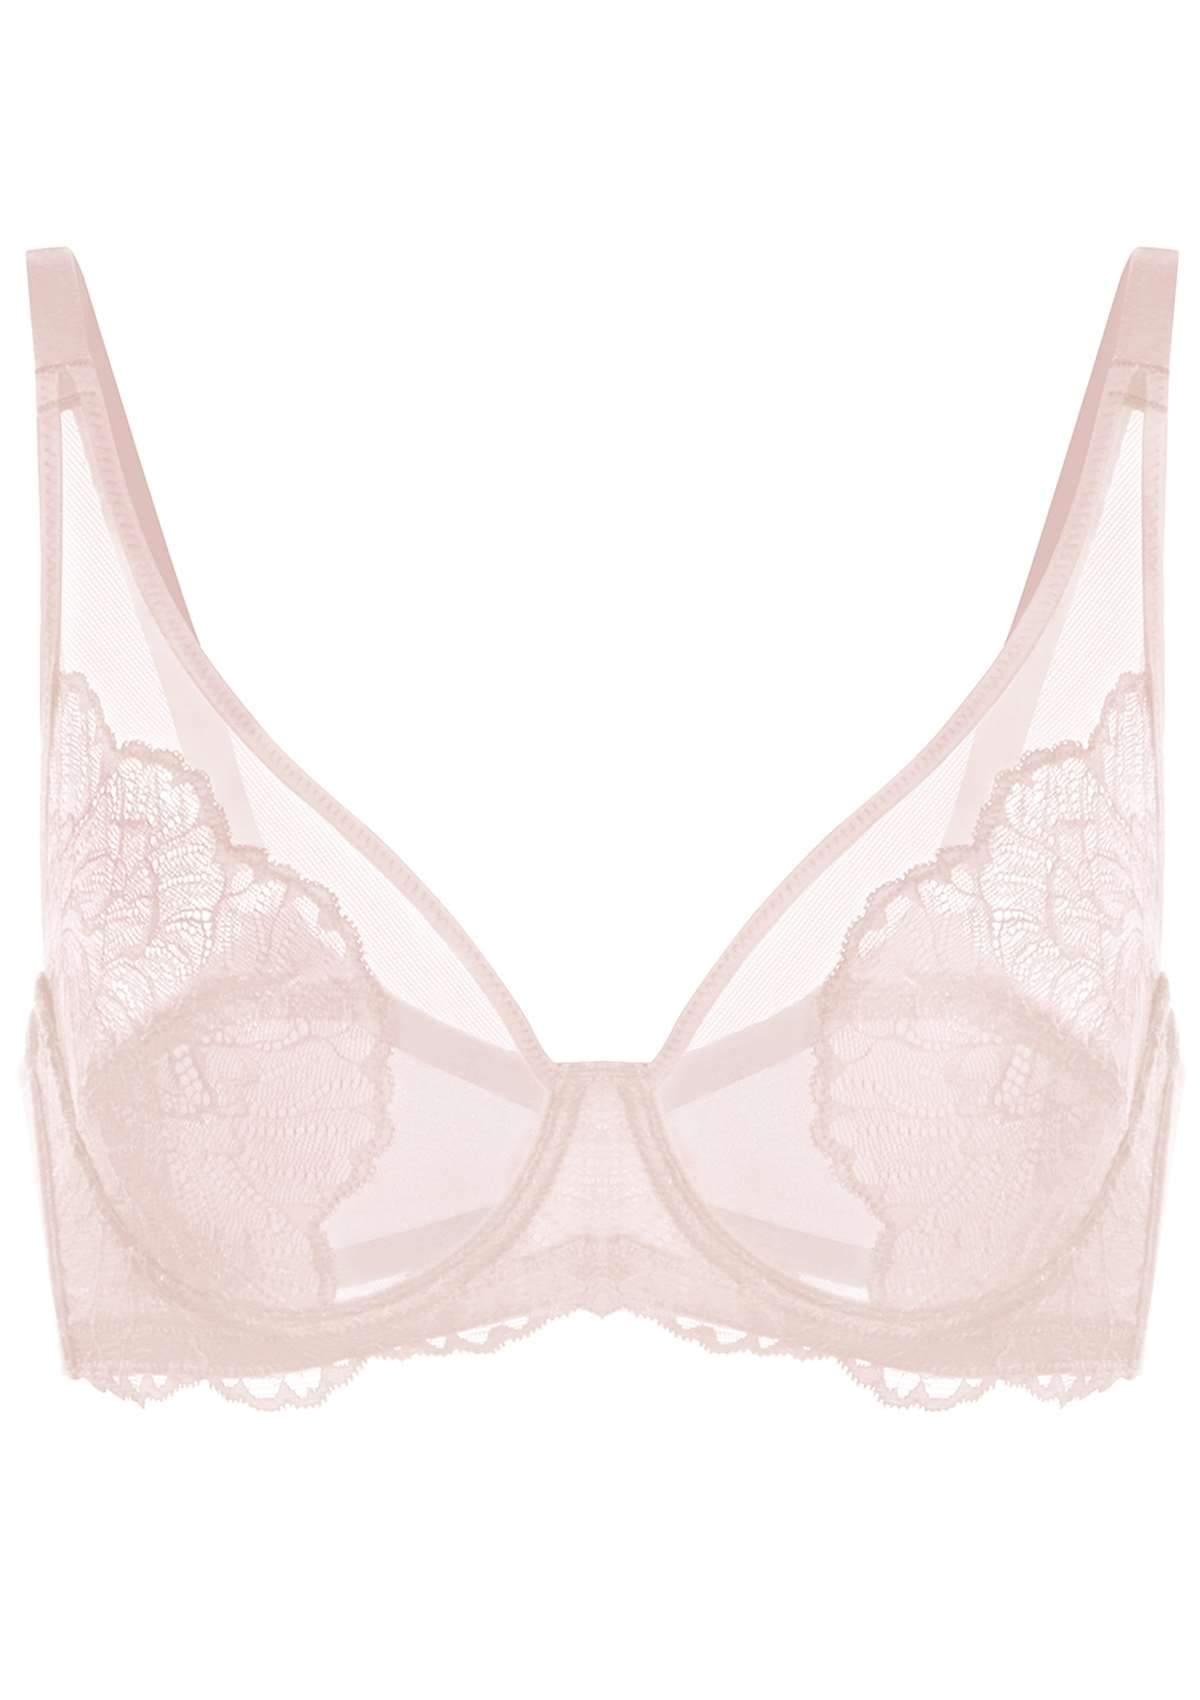 HSIA Blossom Lace Bra And Panties Set: Best Bra For Large Busts - Dark Pink / 36 / H